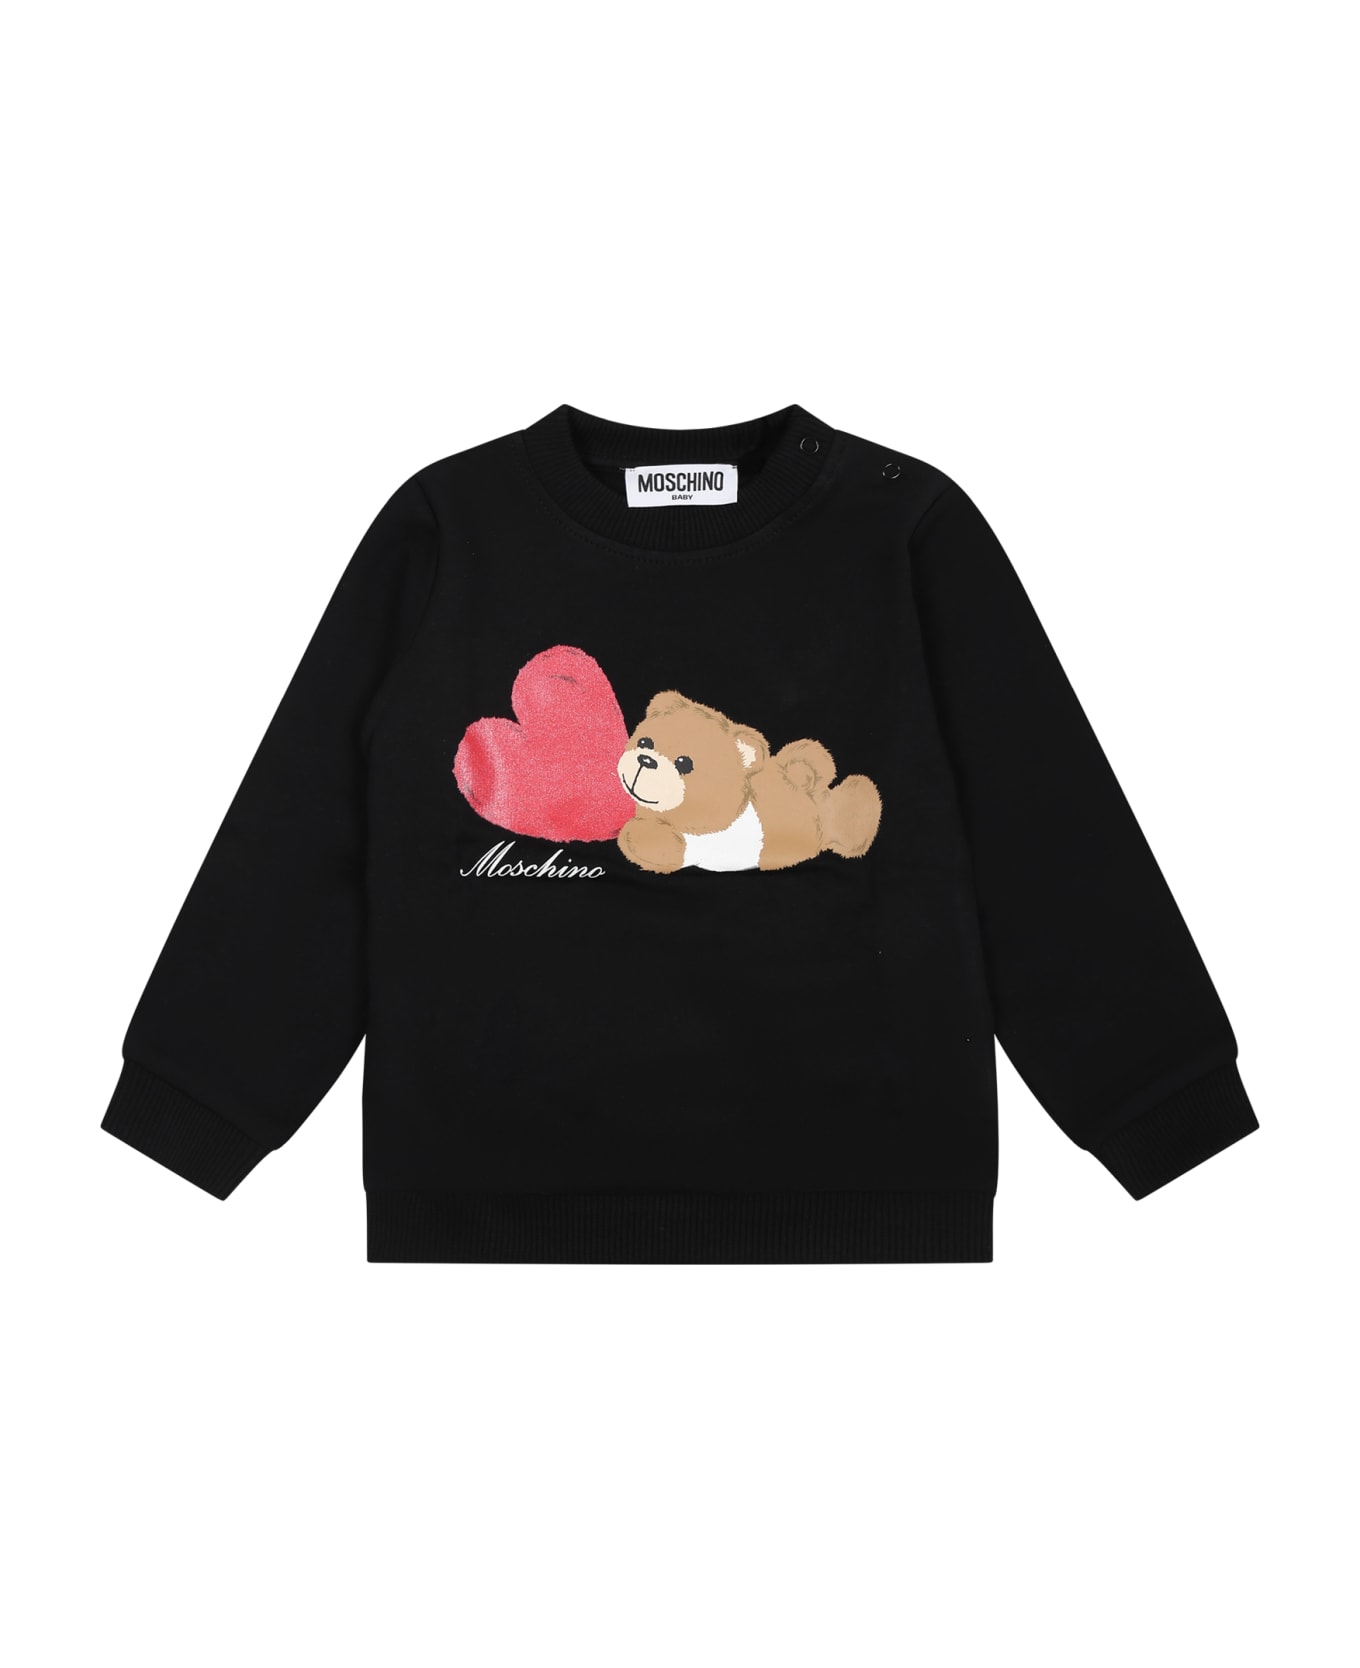 Moschino Black Sweatshirt For Baby Girl With Teddy Bear And Heart - Black